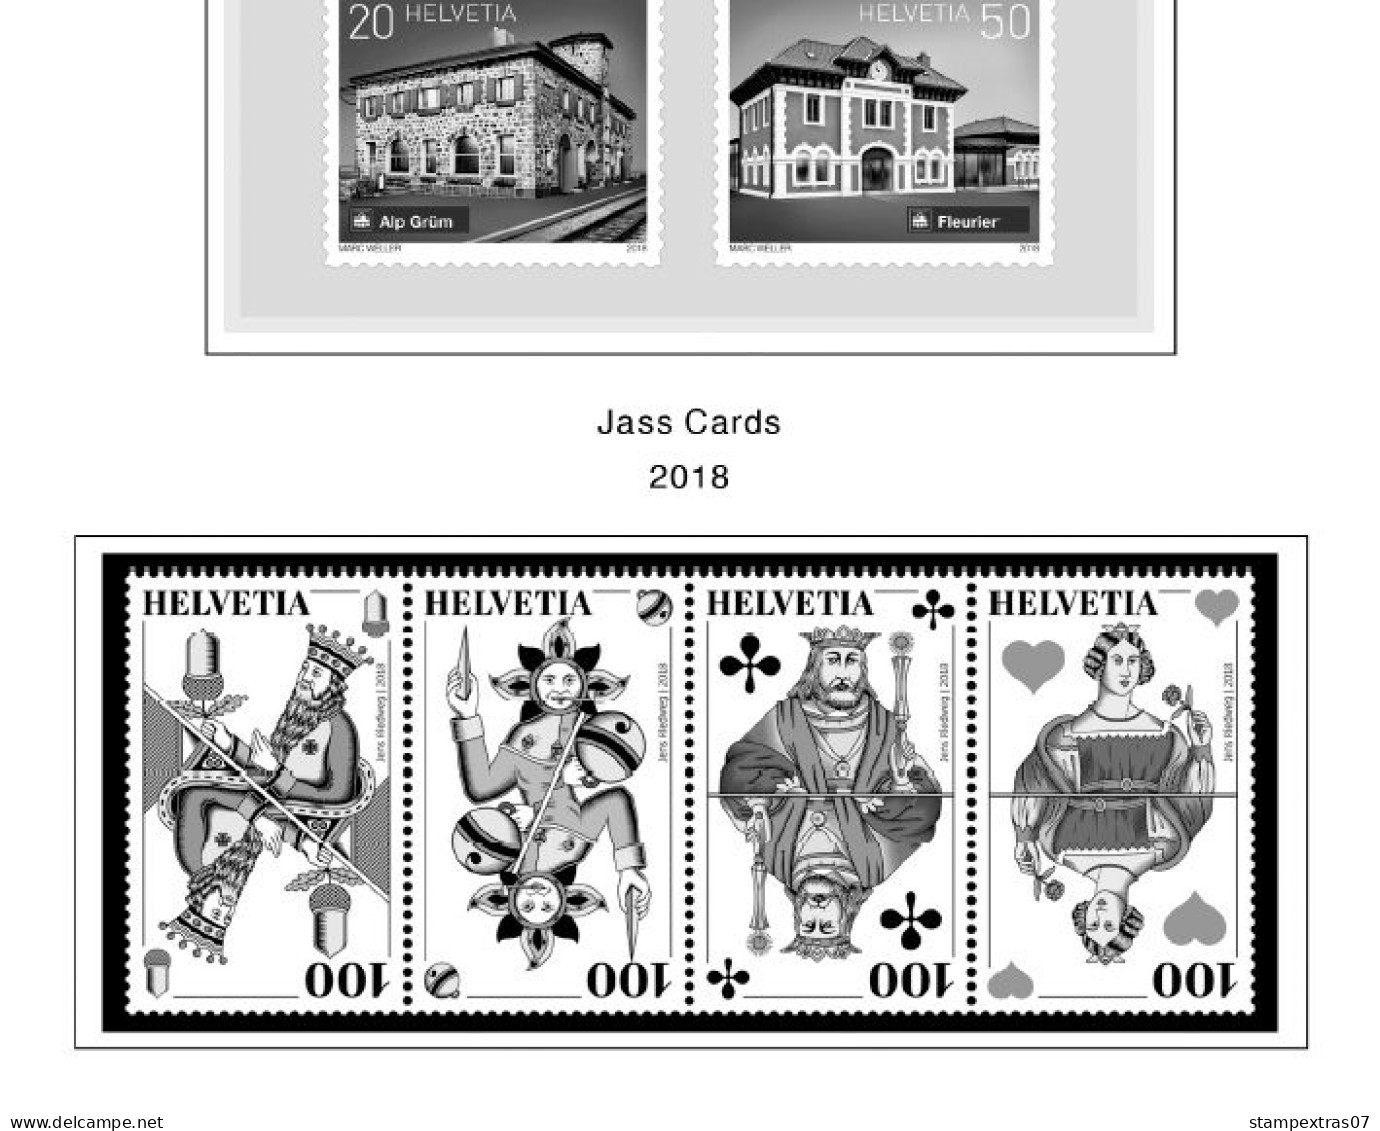 SWITZERLAND 1843-2010 + 2011-2020 STAMP ALBUM PAGES (277 b&w illustrated pages)